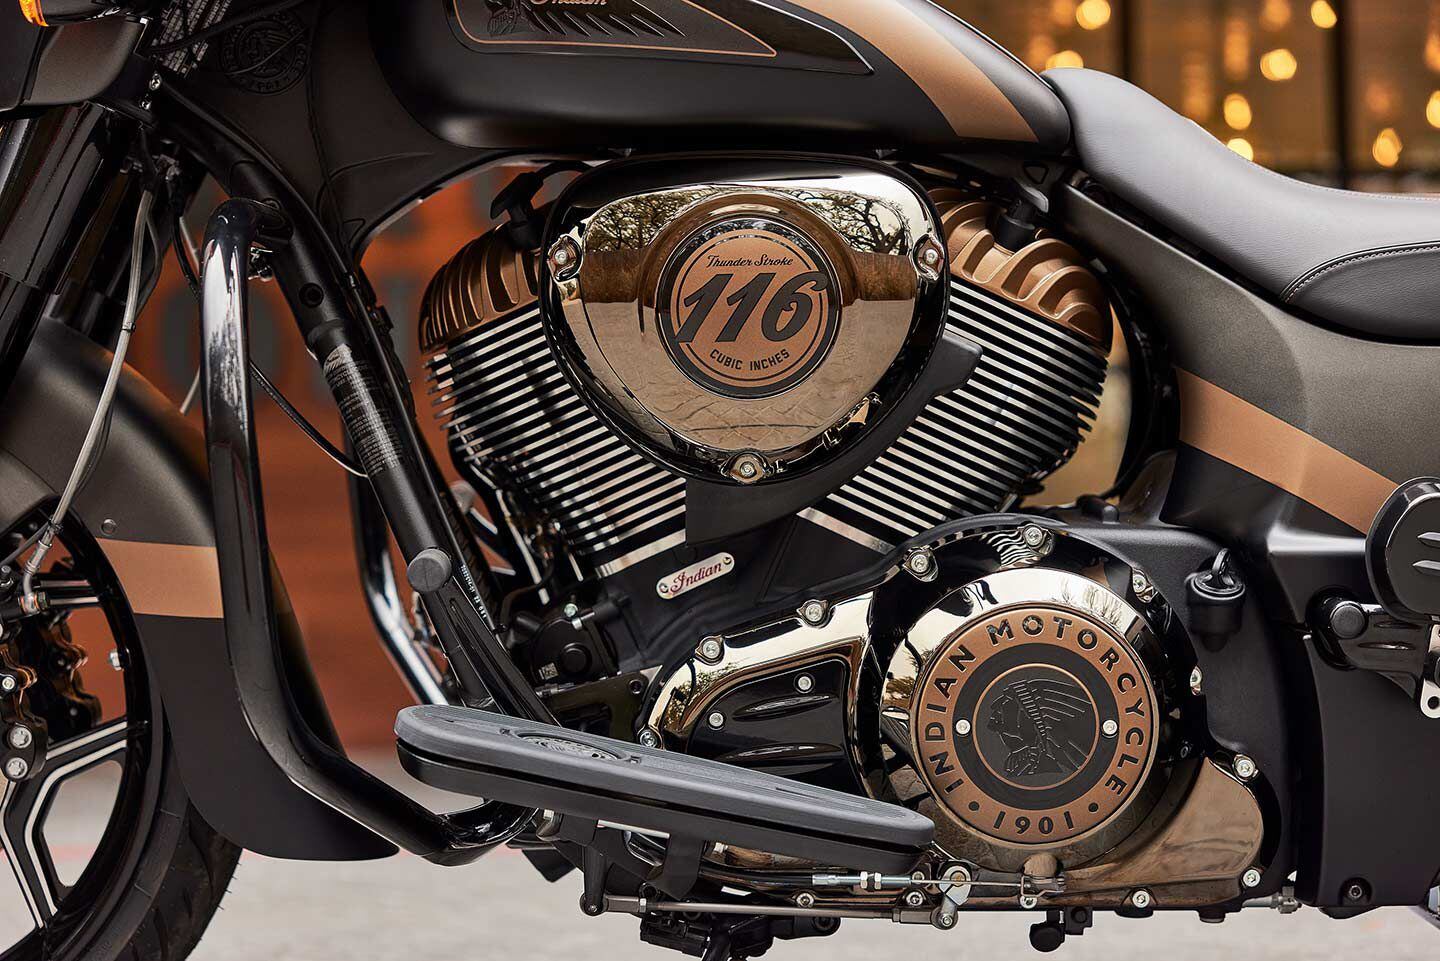 The Chieftain Elite’s Thunderstroke 116 engine can be adjusted via three selectable ride modes. Externally, it gets gussied up with what Indian calls “bronze chrome finishes.”